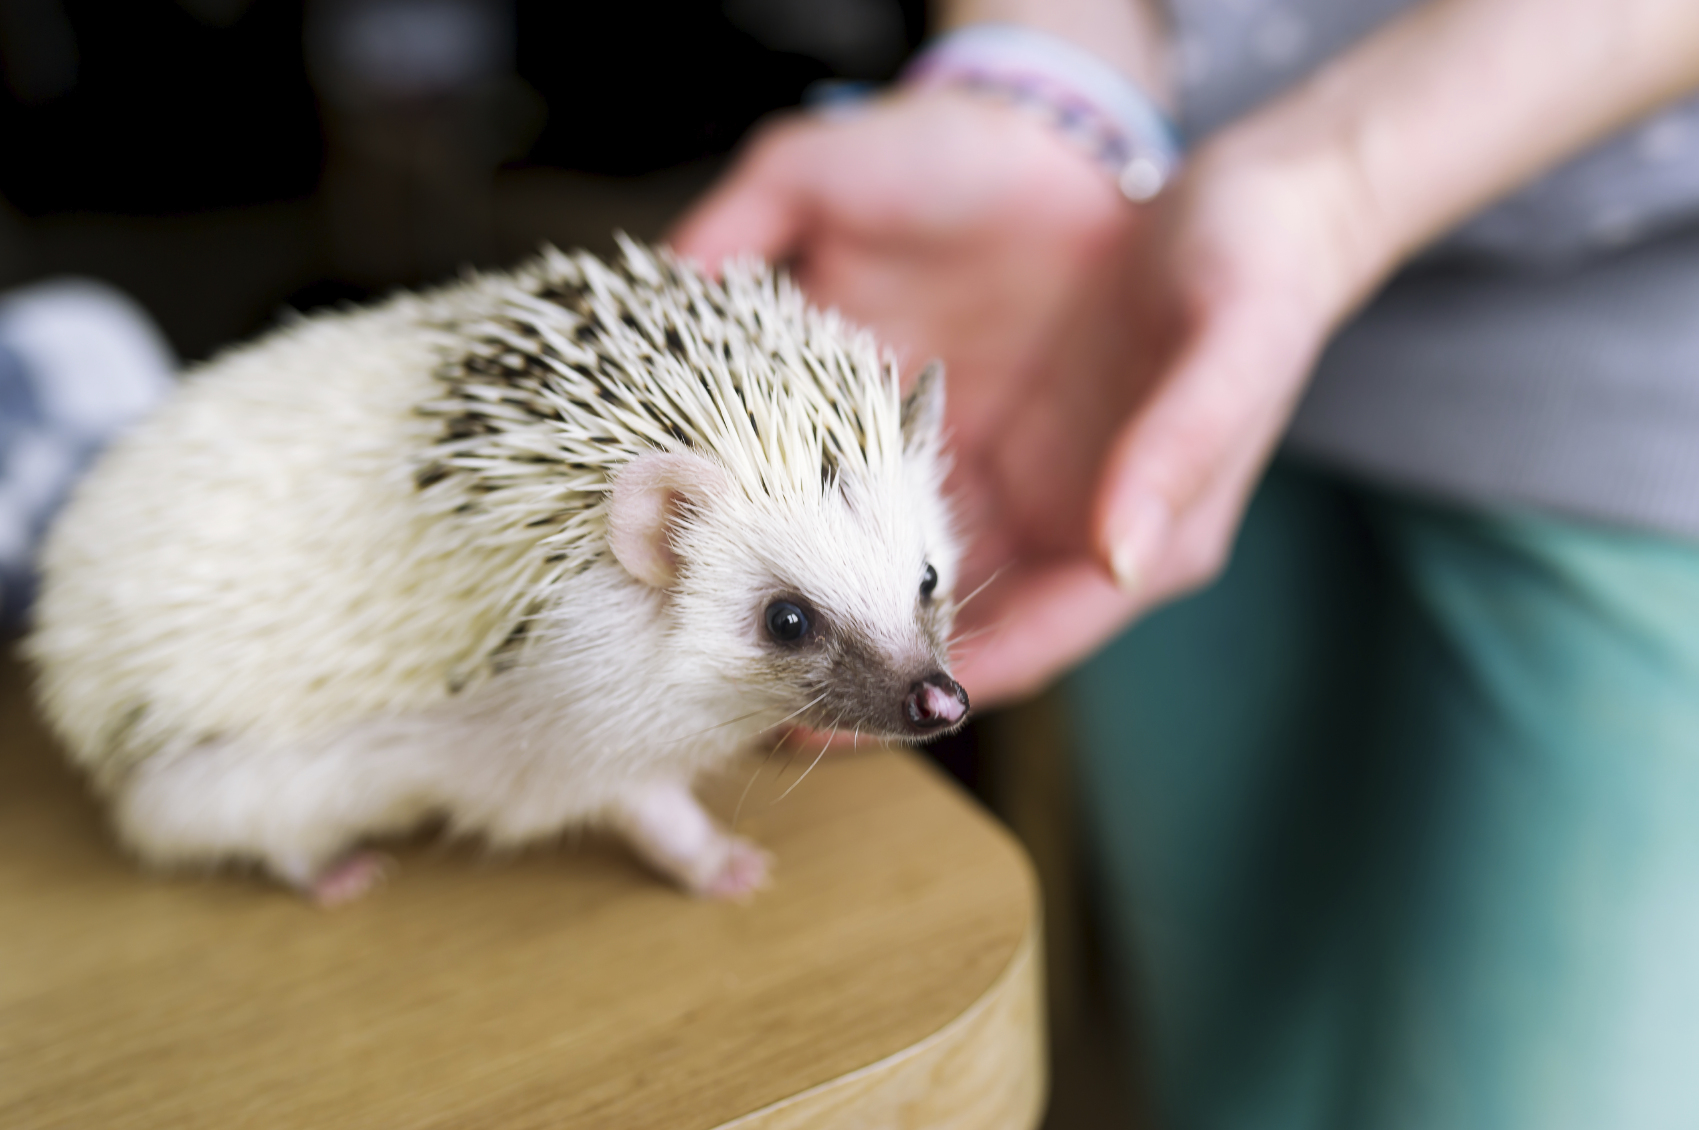 The woman takes the African hedgehog in hand